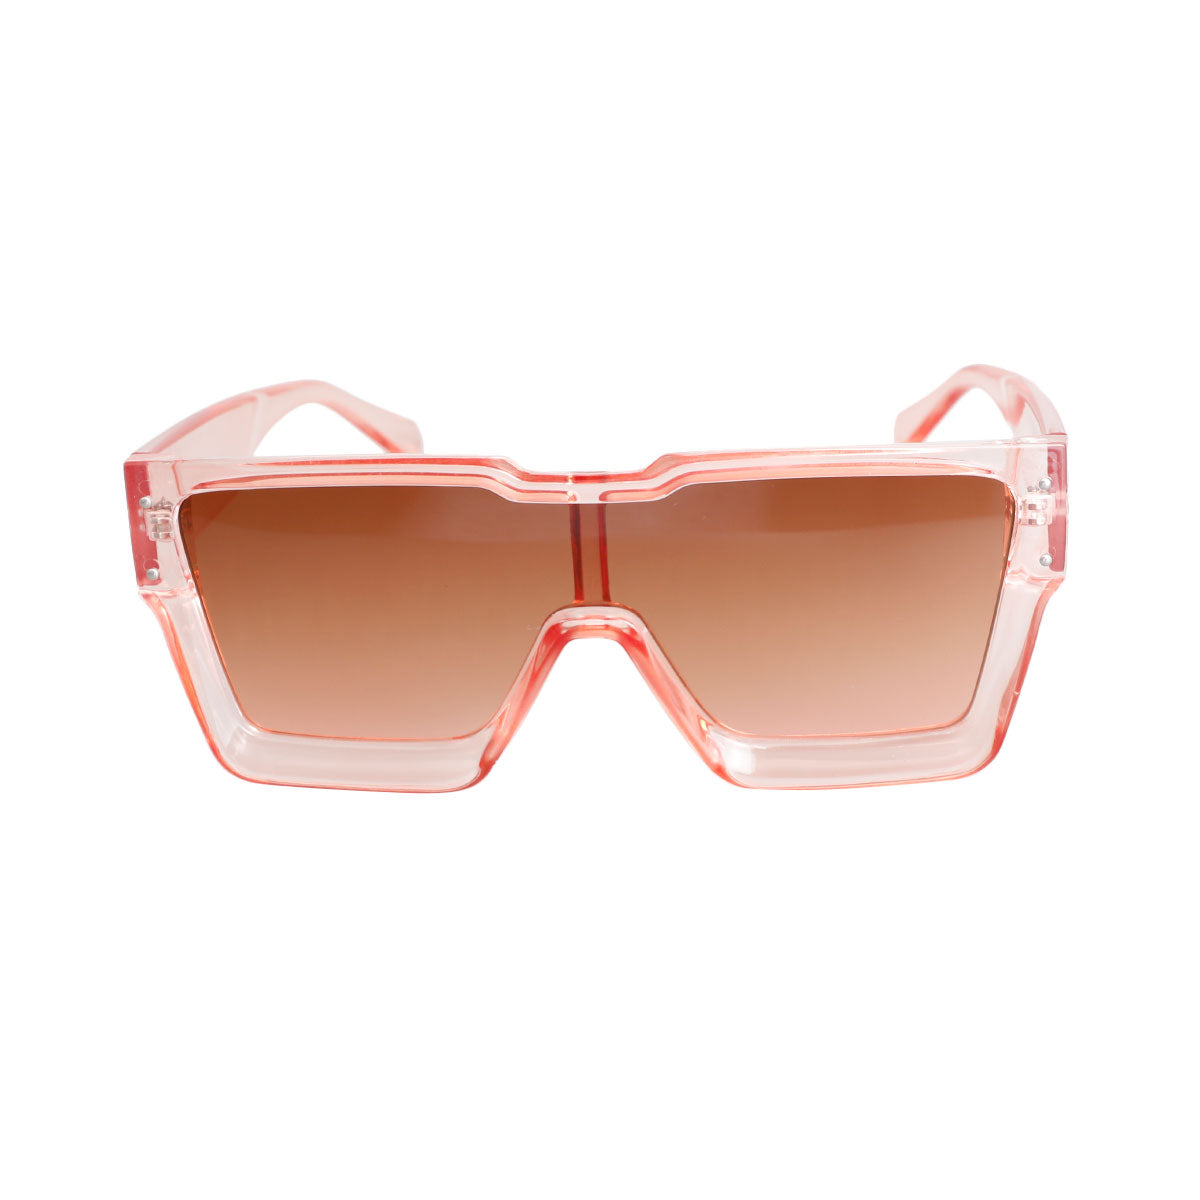 Pink Square Thick Frame Sunglasses